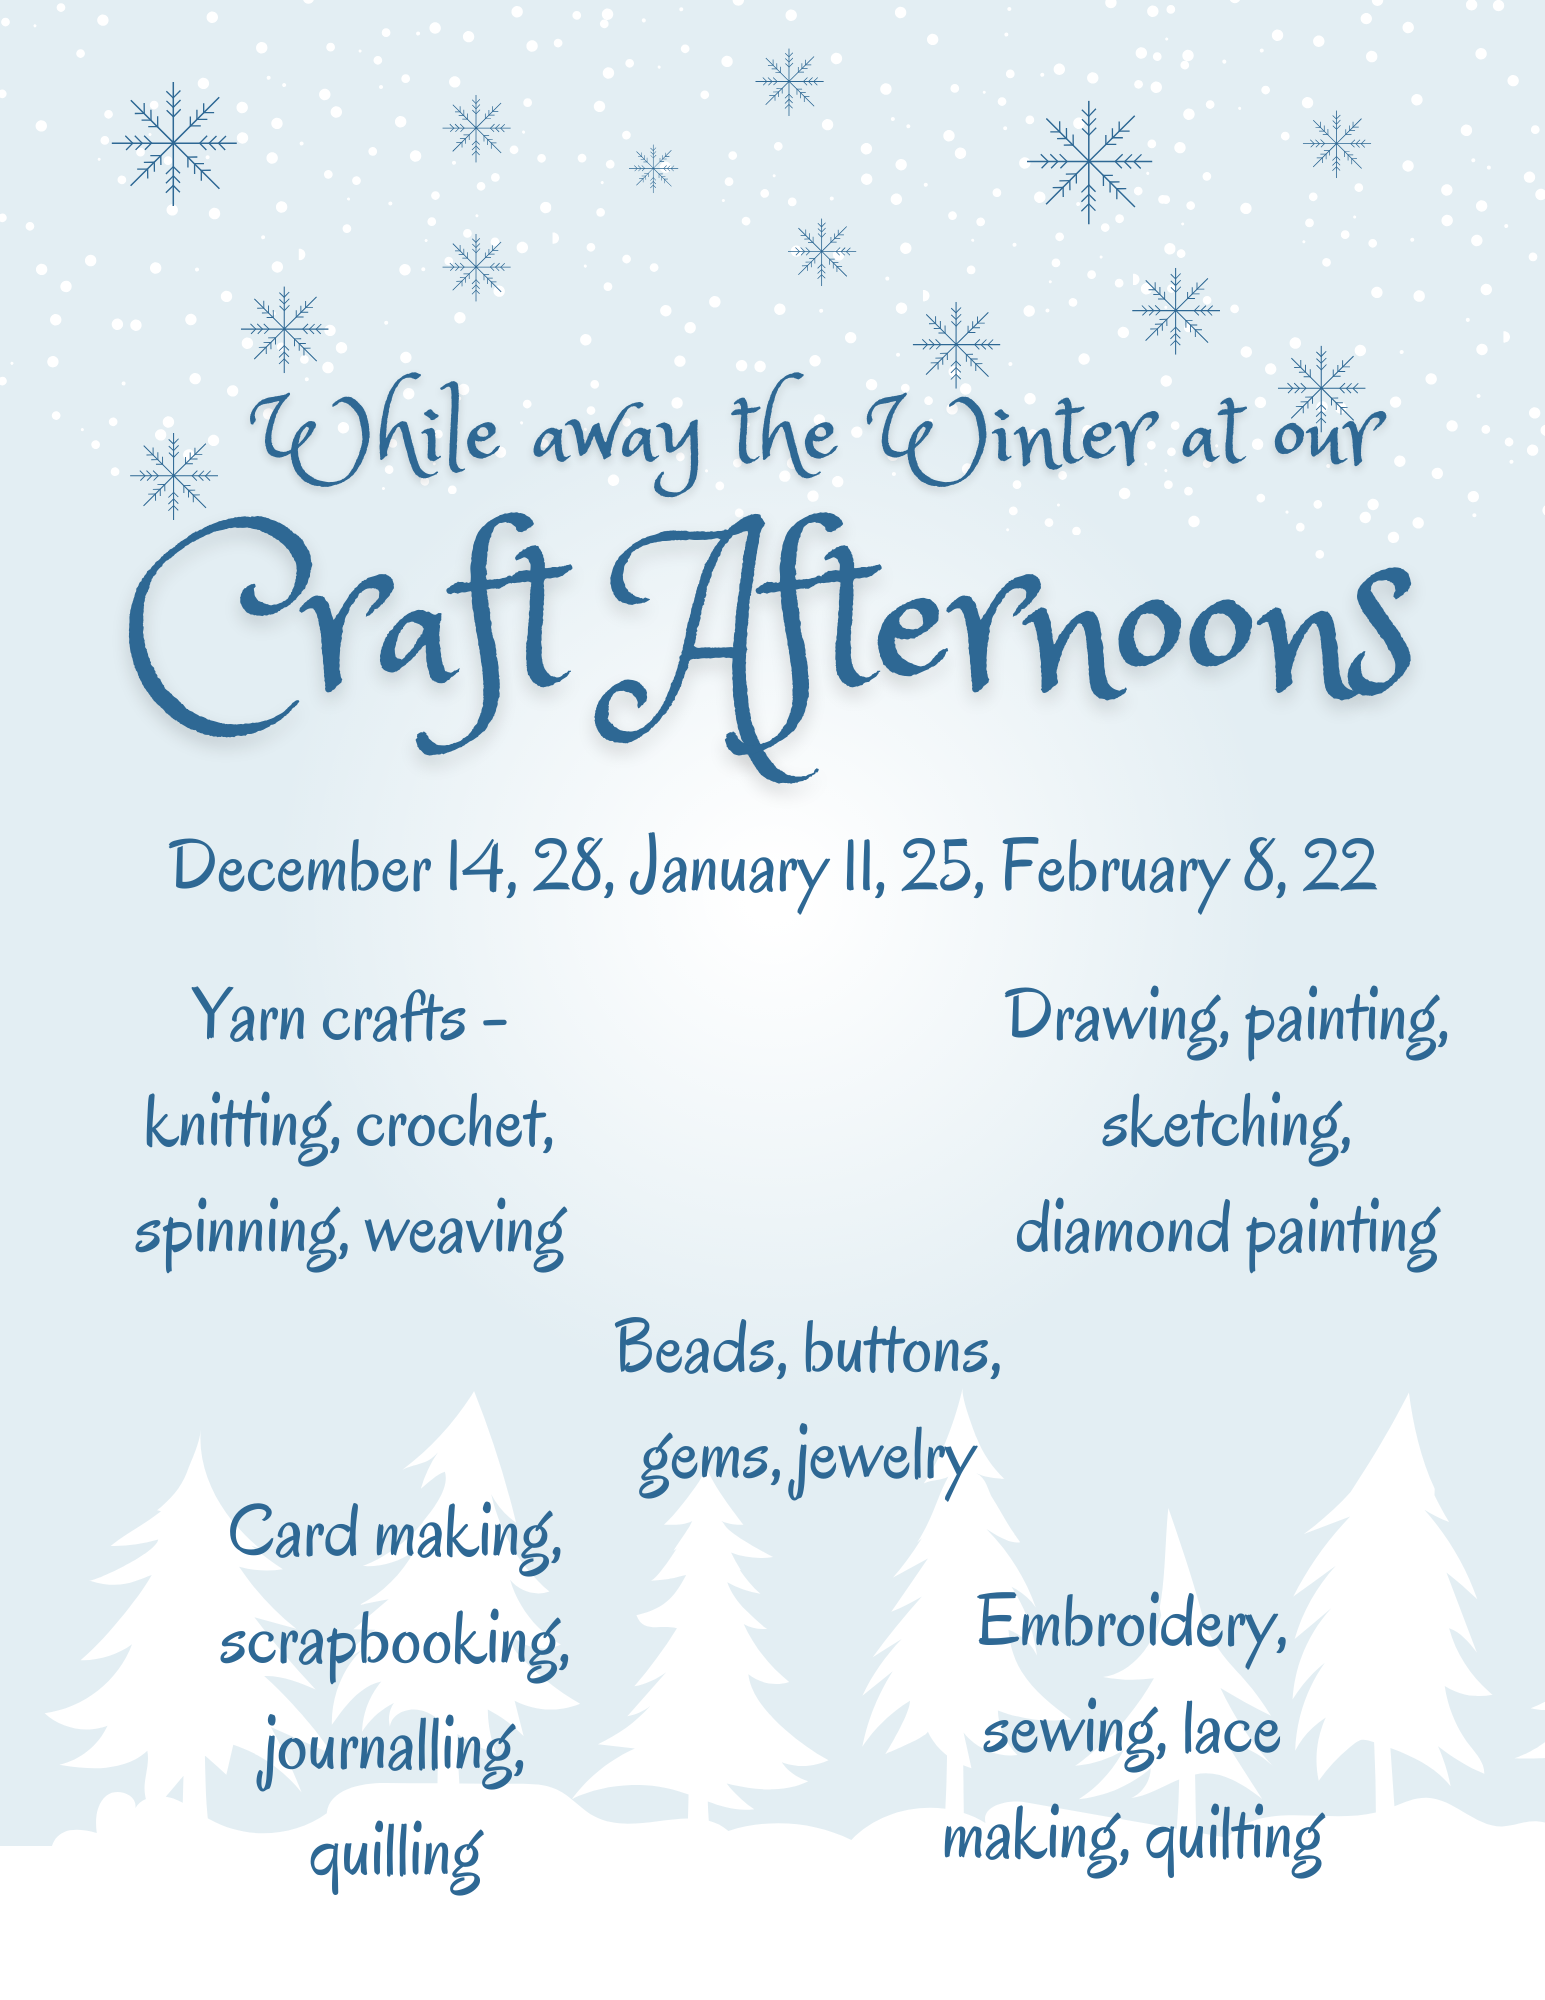 Join us for crafting at 1.30pm on December 14 and 28, January 11 and 25, February 8 and 22. All crafts welcome. 